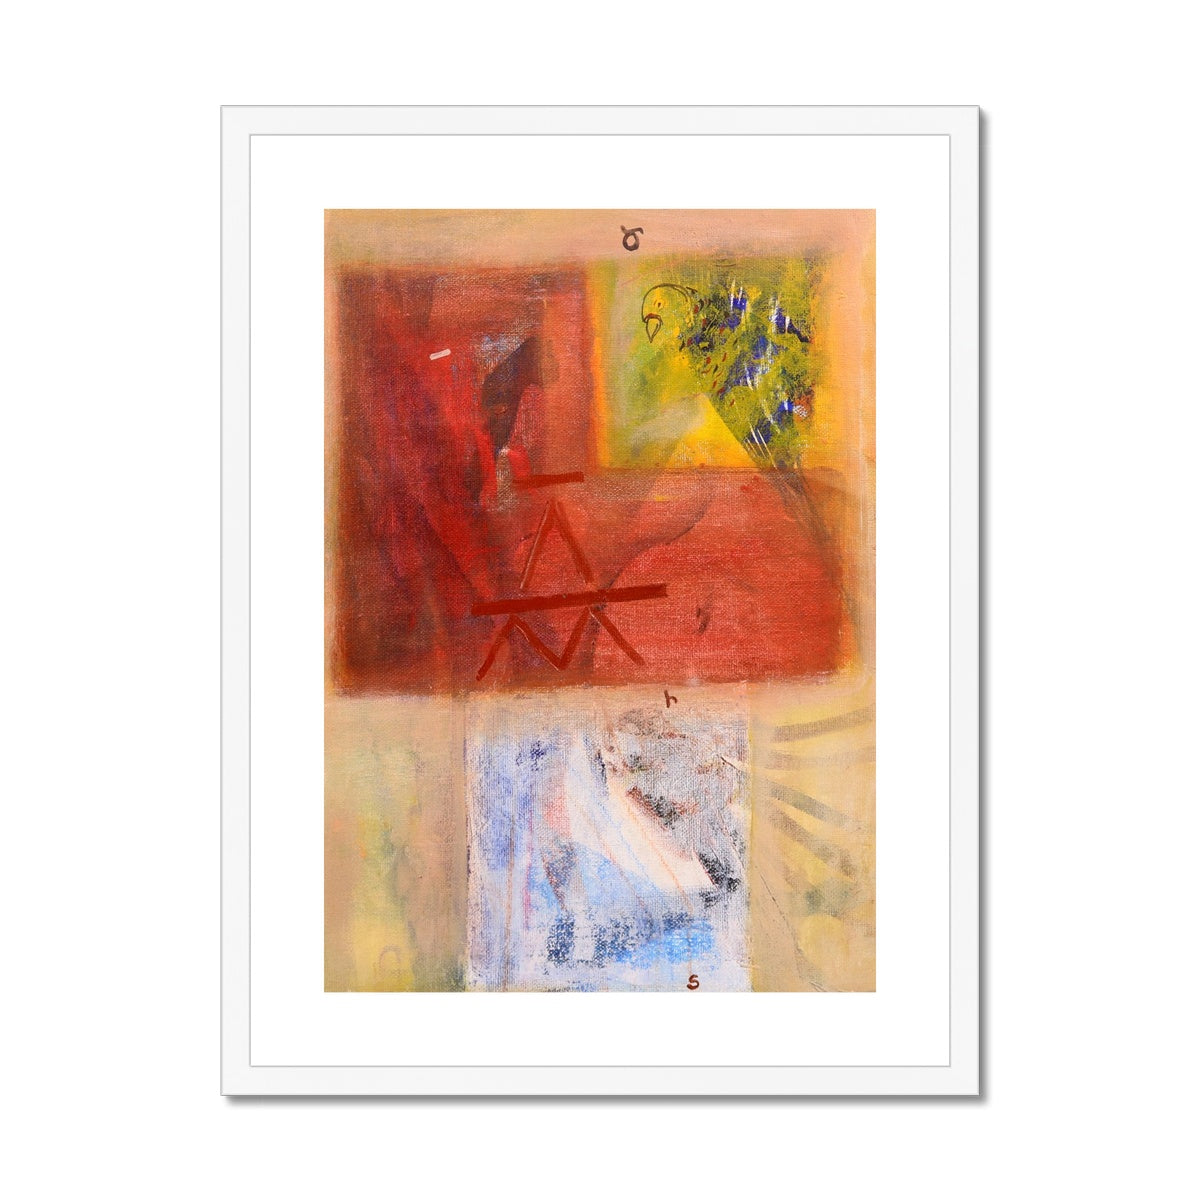 When you think you can fly, Framed & Mounted Print